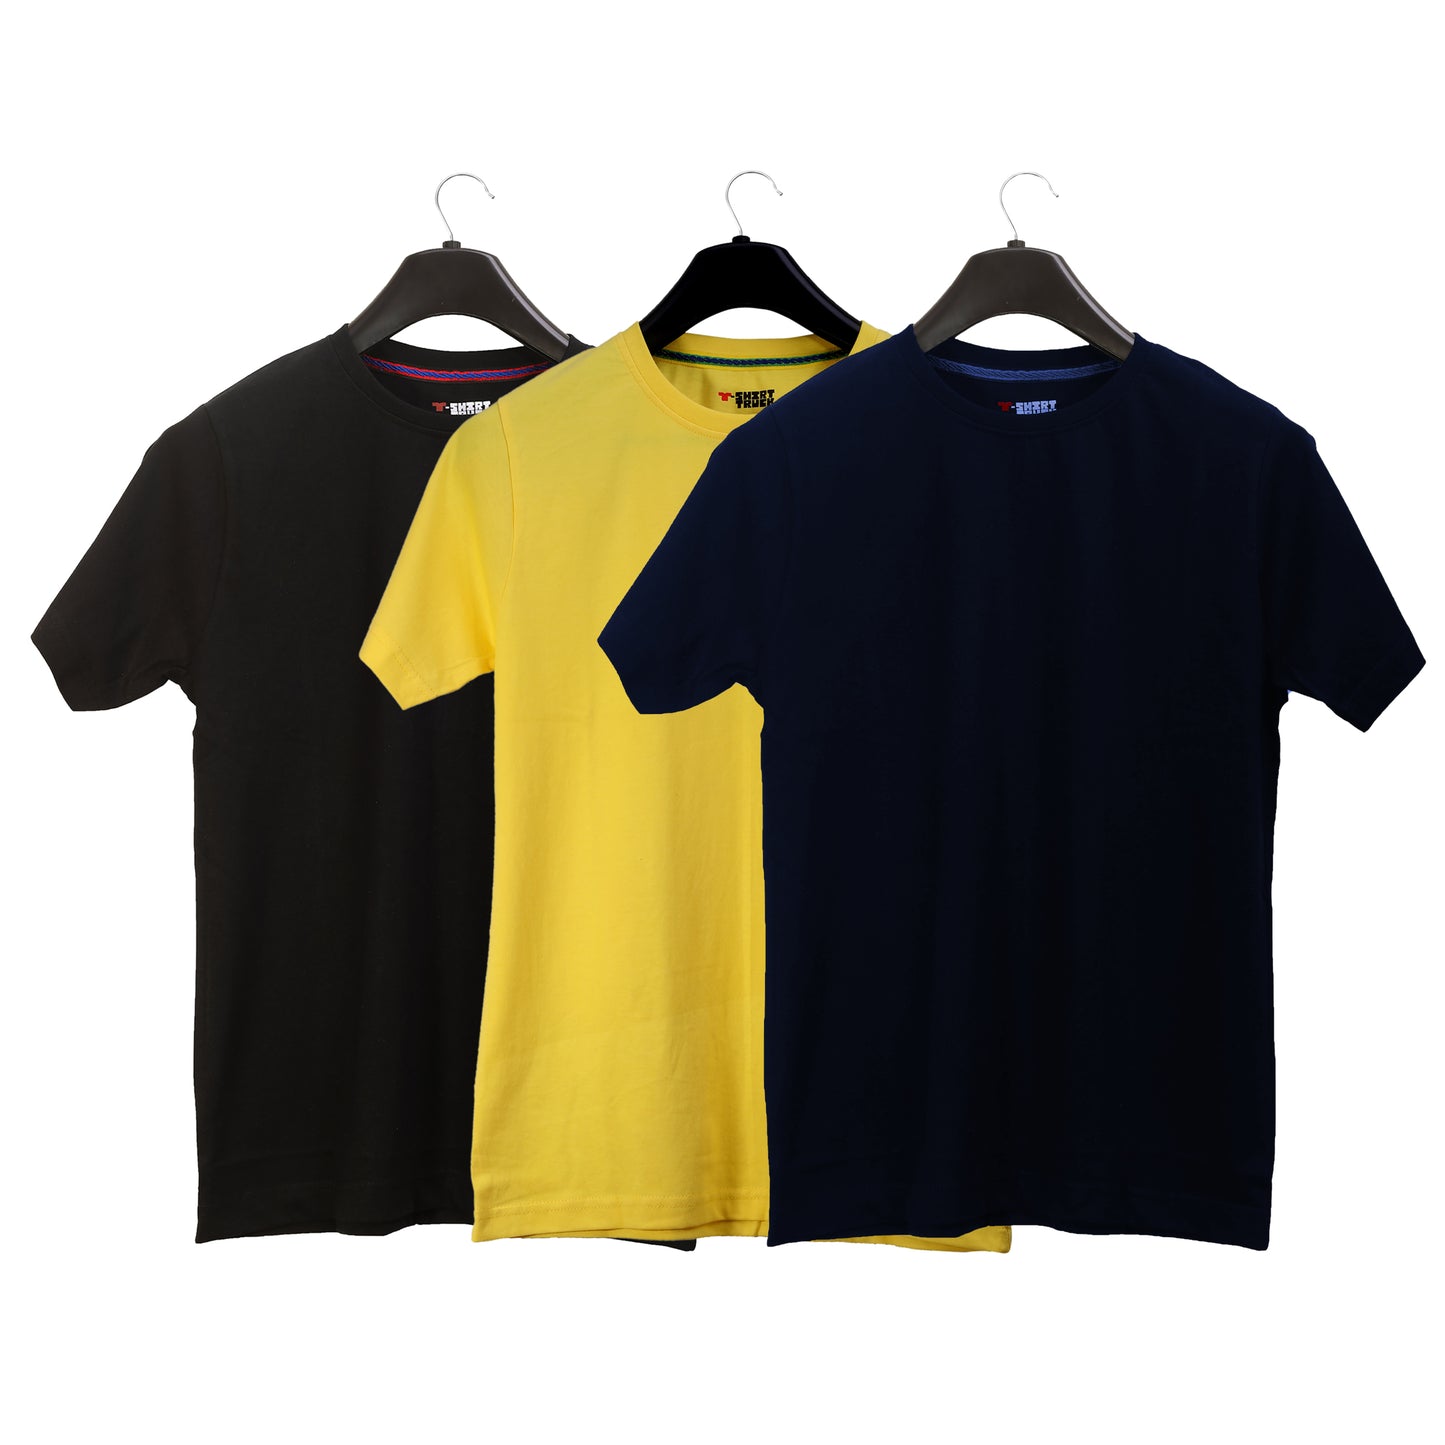 Unisex Round Neck Plain Solid Combo Pack of 3 T-shirts Black, Yellow & Blue